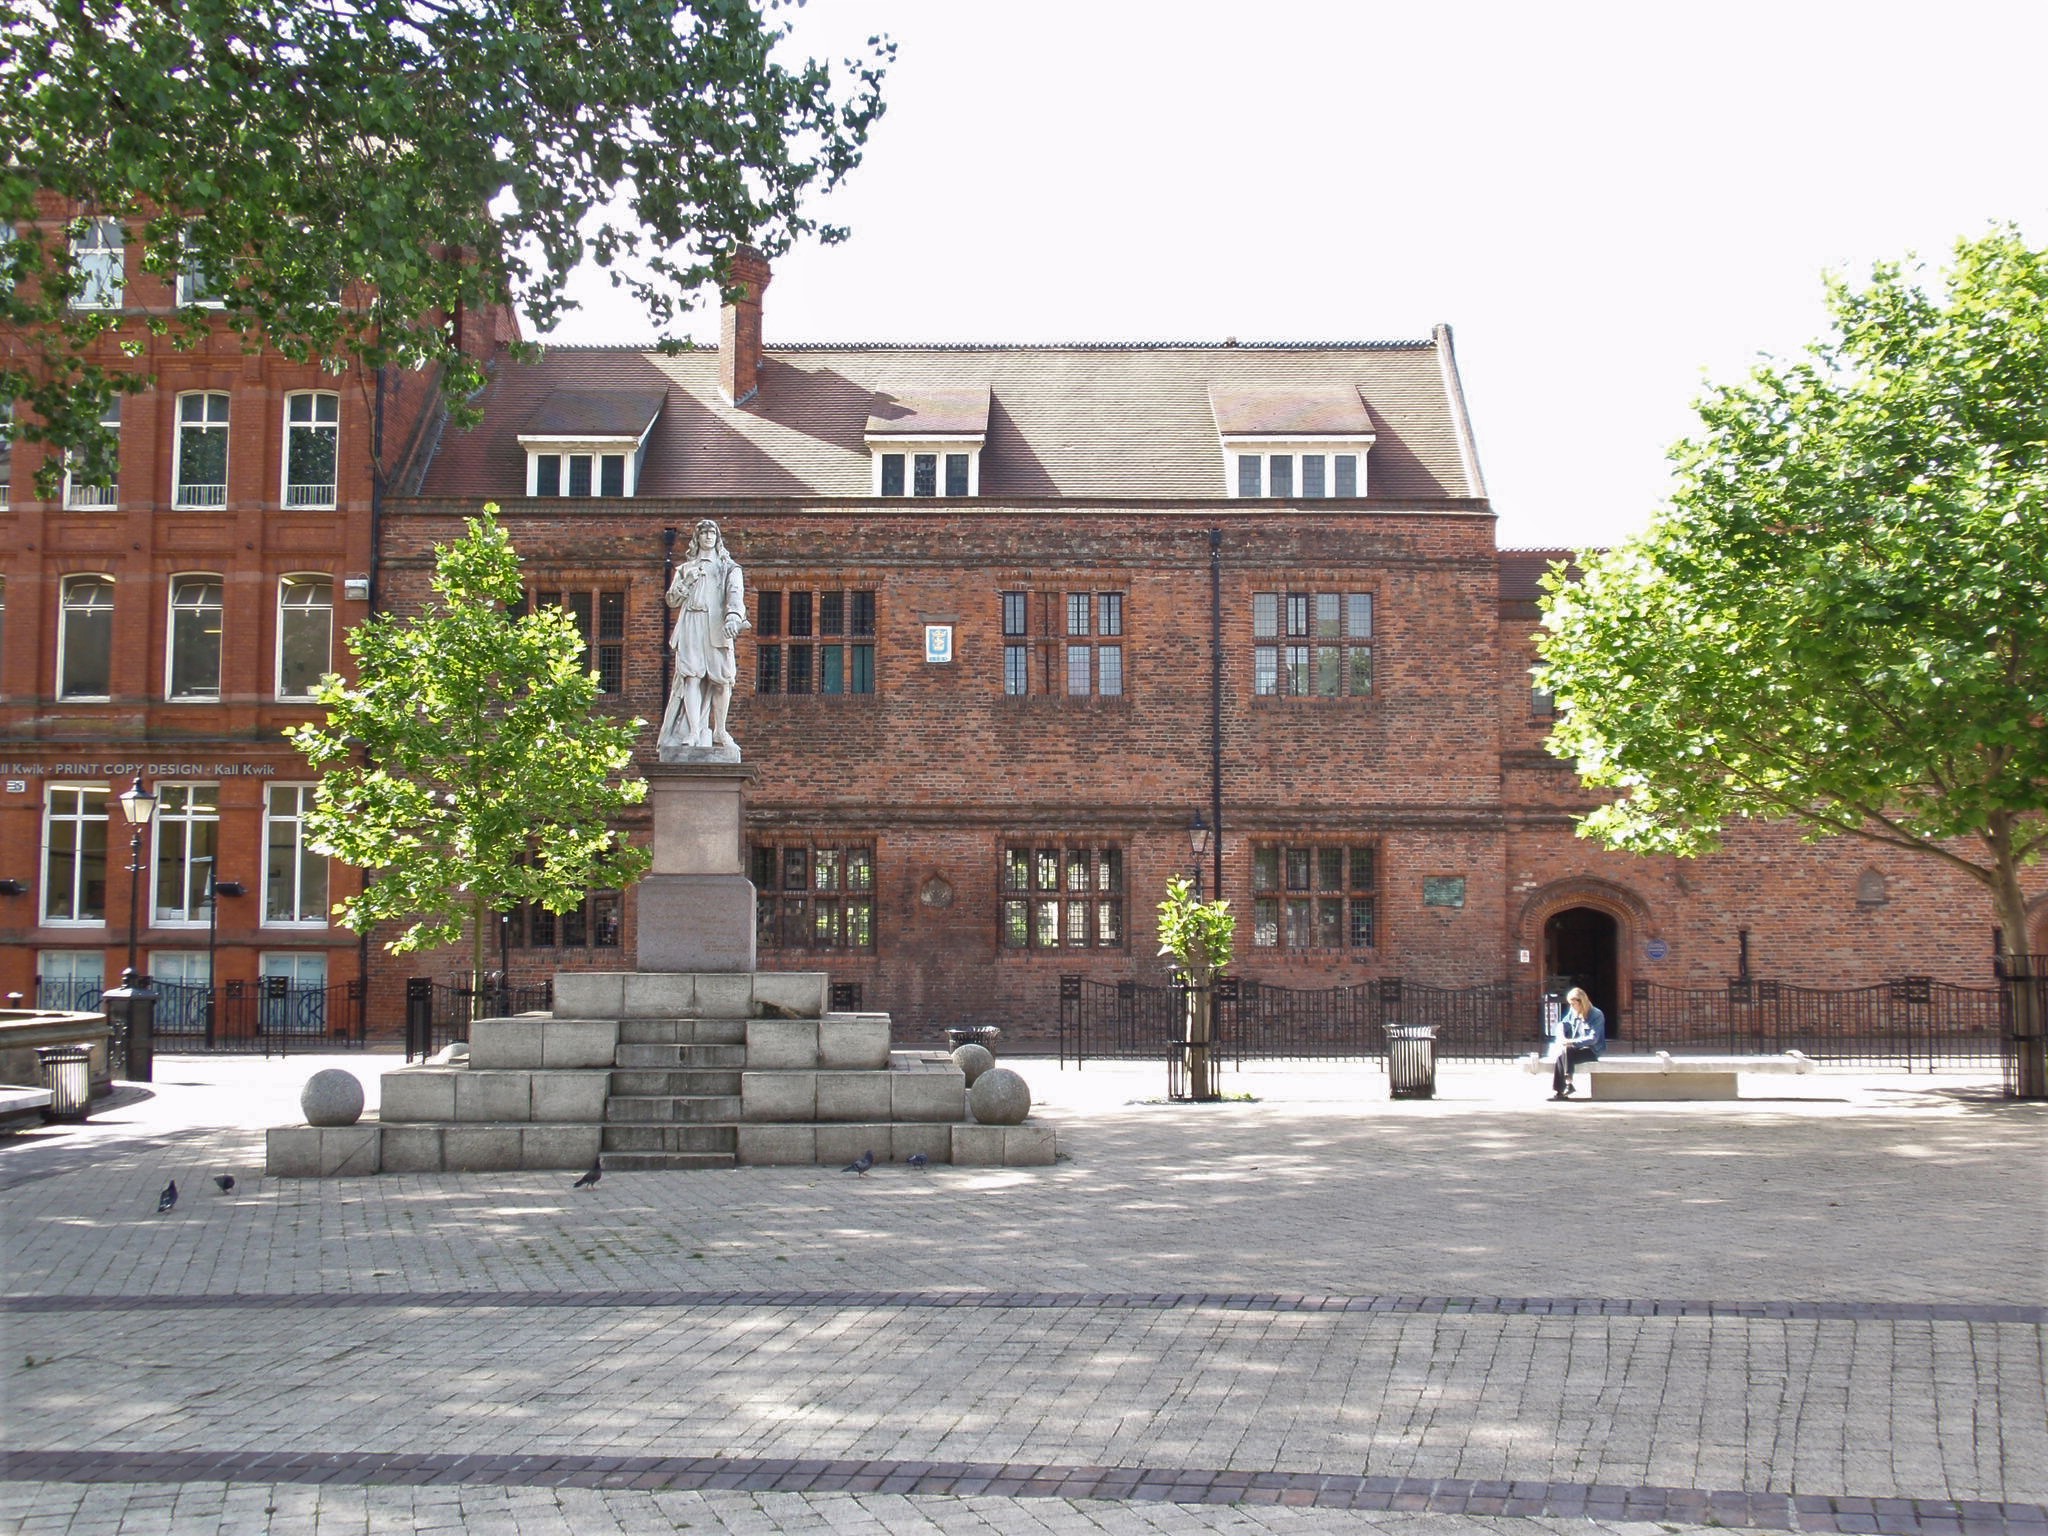 Statue in a paved square with a red brick building in the background and a couple of trees either side